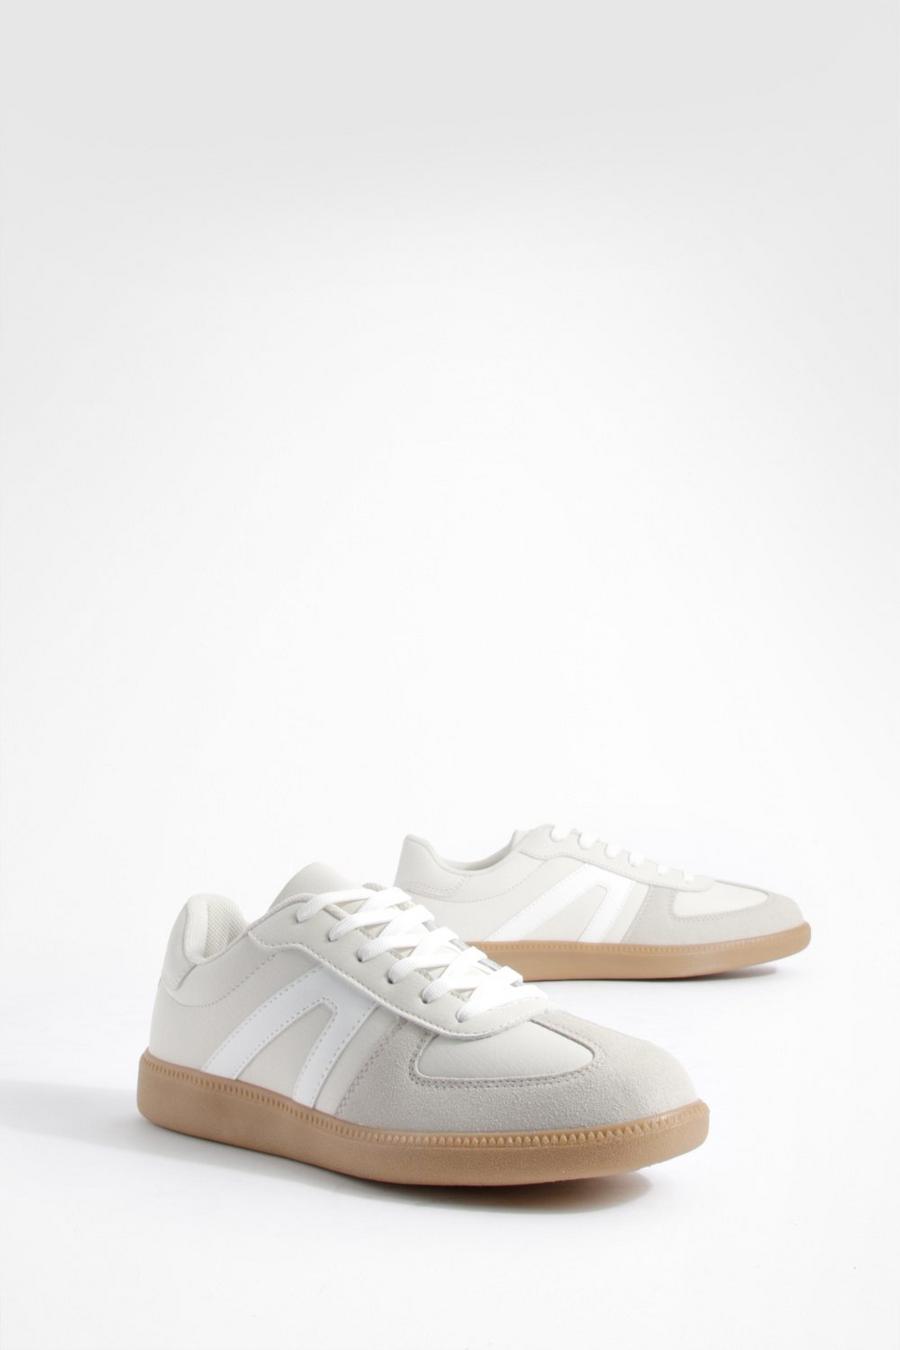 Stone Contrast Panel Gum Sole Sneakers